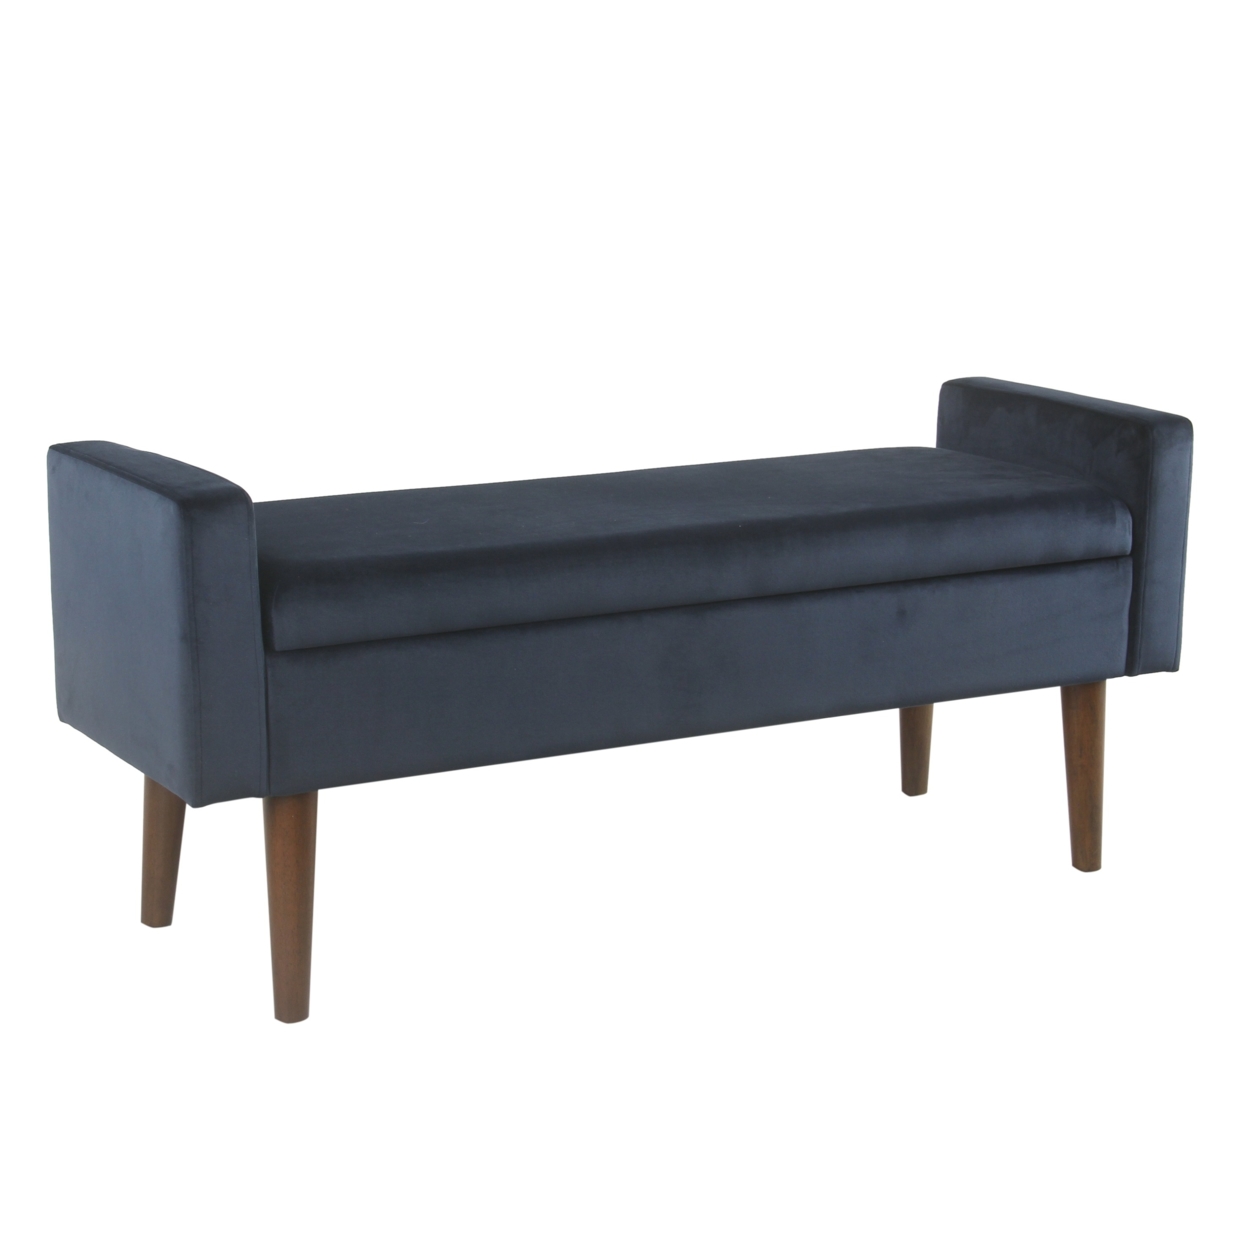 Velvet Upholstered Wooden Bench with Lift Top Storage and Tapered Feet, Navy Blue